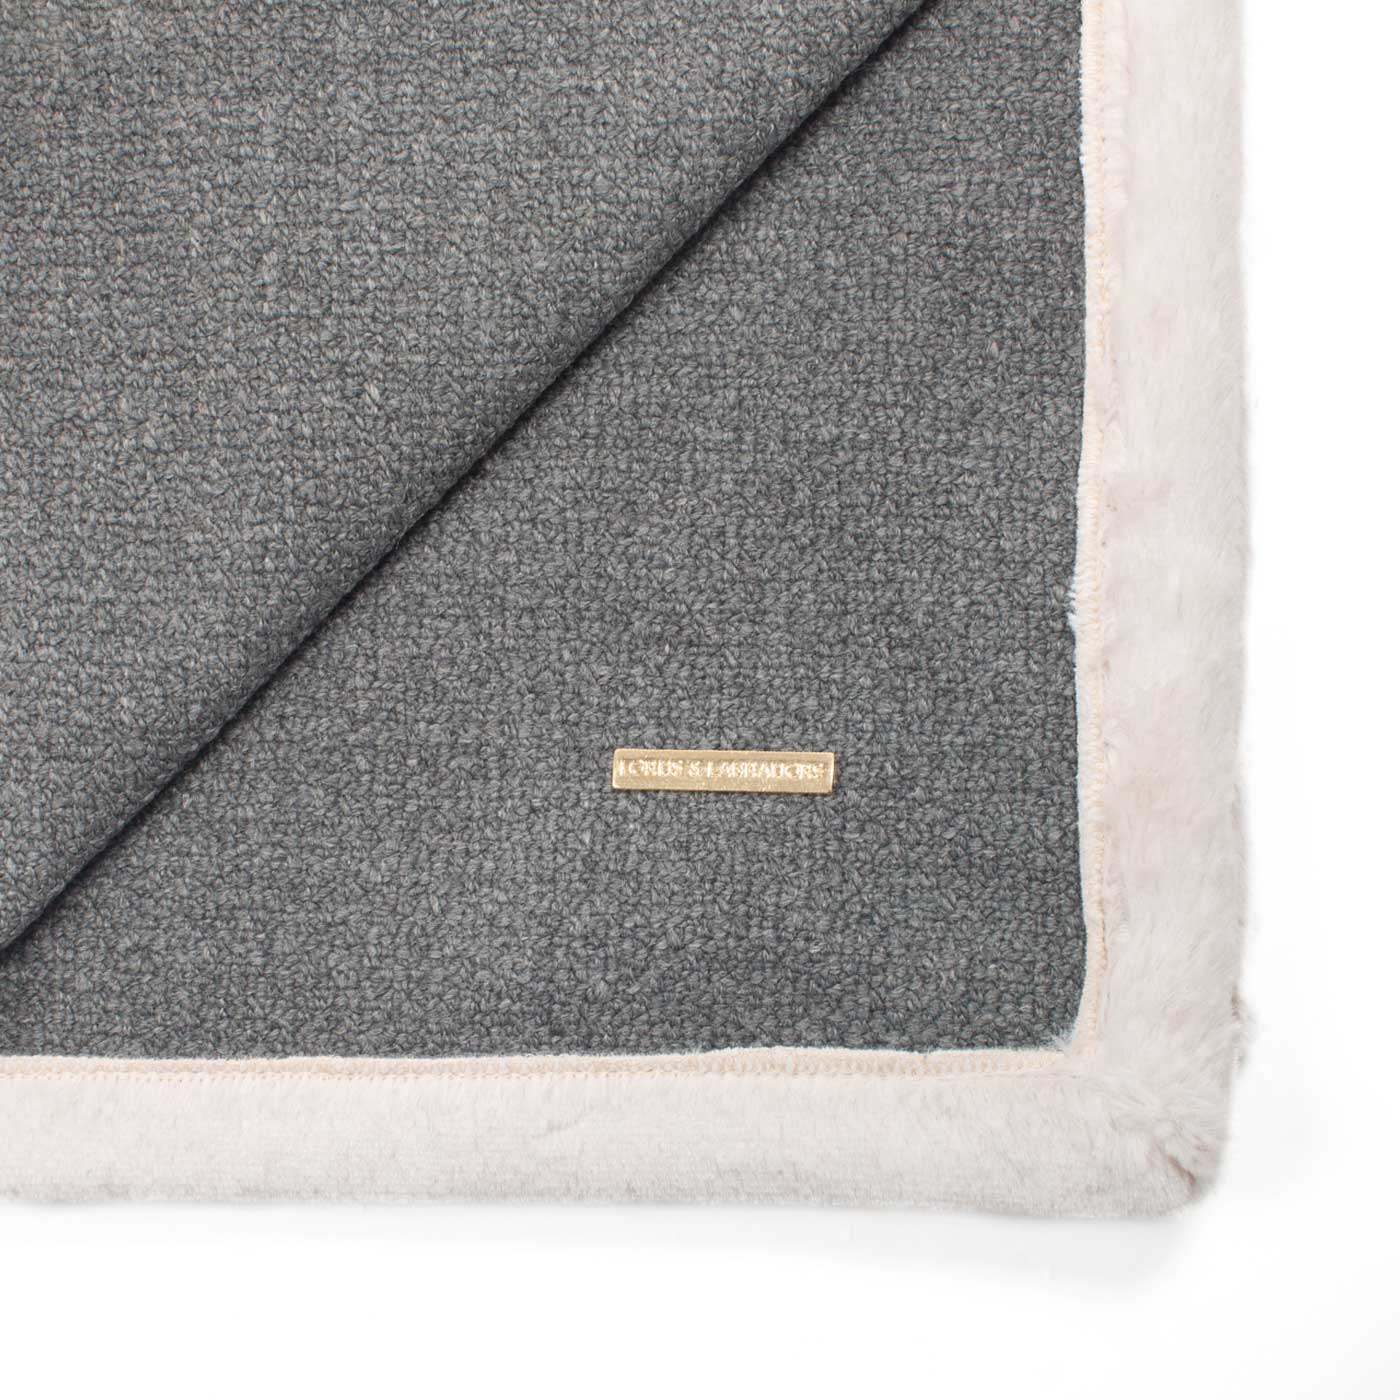 Present your furry friend with our luxuriously thick, plush blanket for your pet. Featuring a reverse side with hardwearing woven fabric handmade in Italy for the perfect high-quality pet blanket! Essentials Herdwick Blanket In Graphite, Available now at Lords & Labradors    